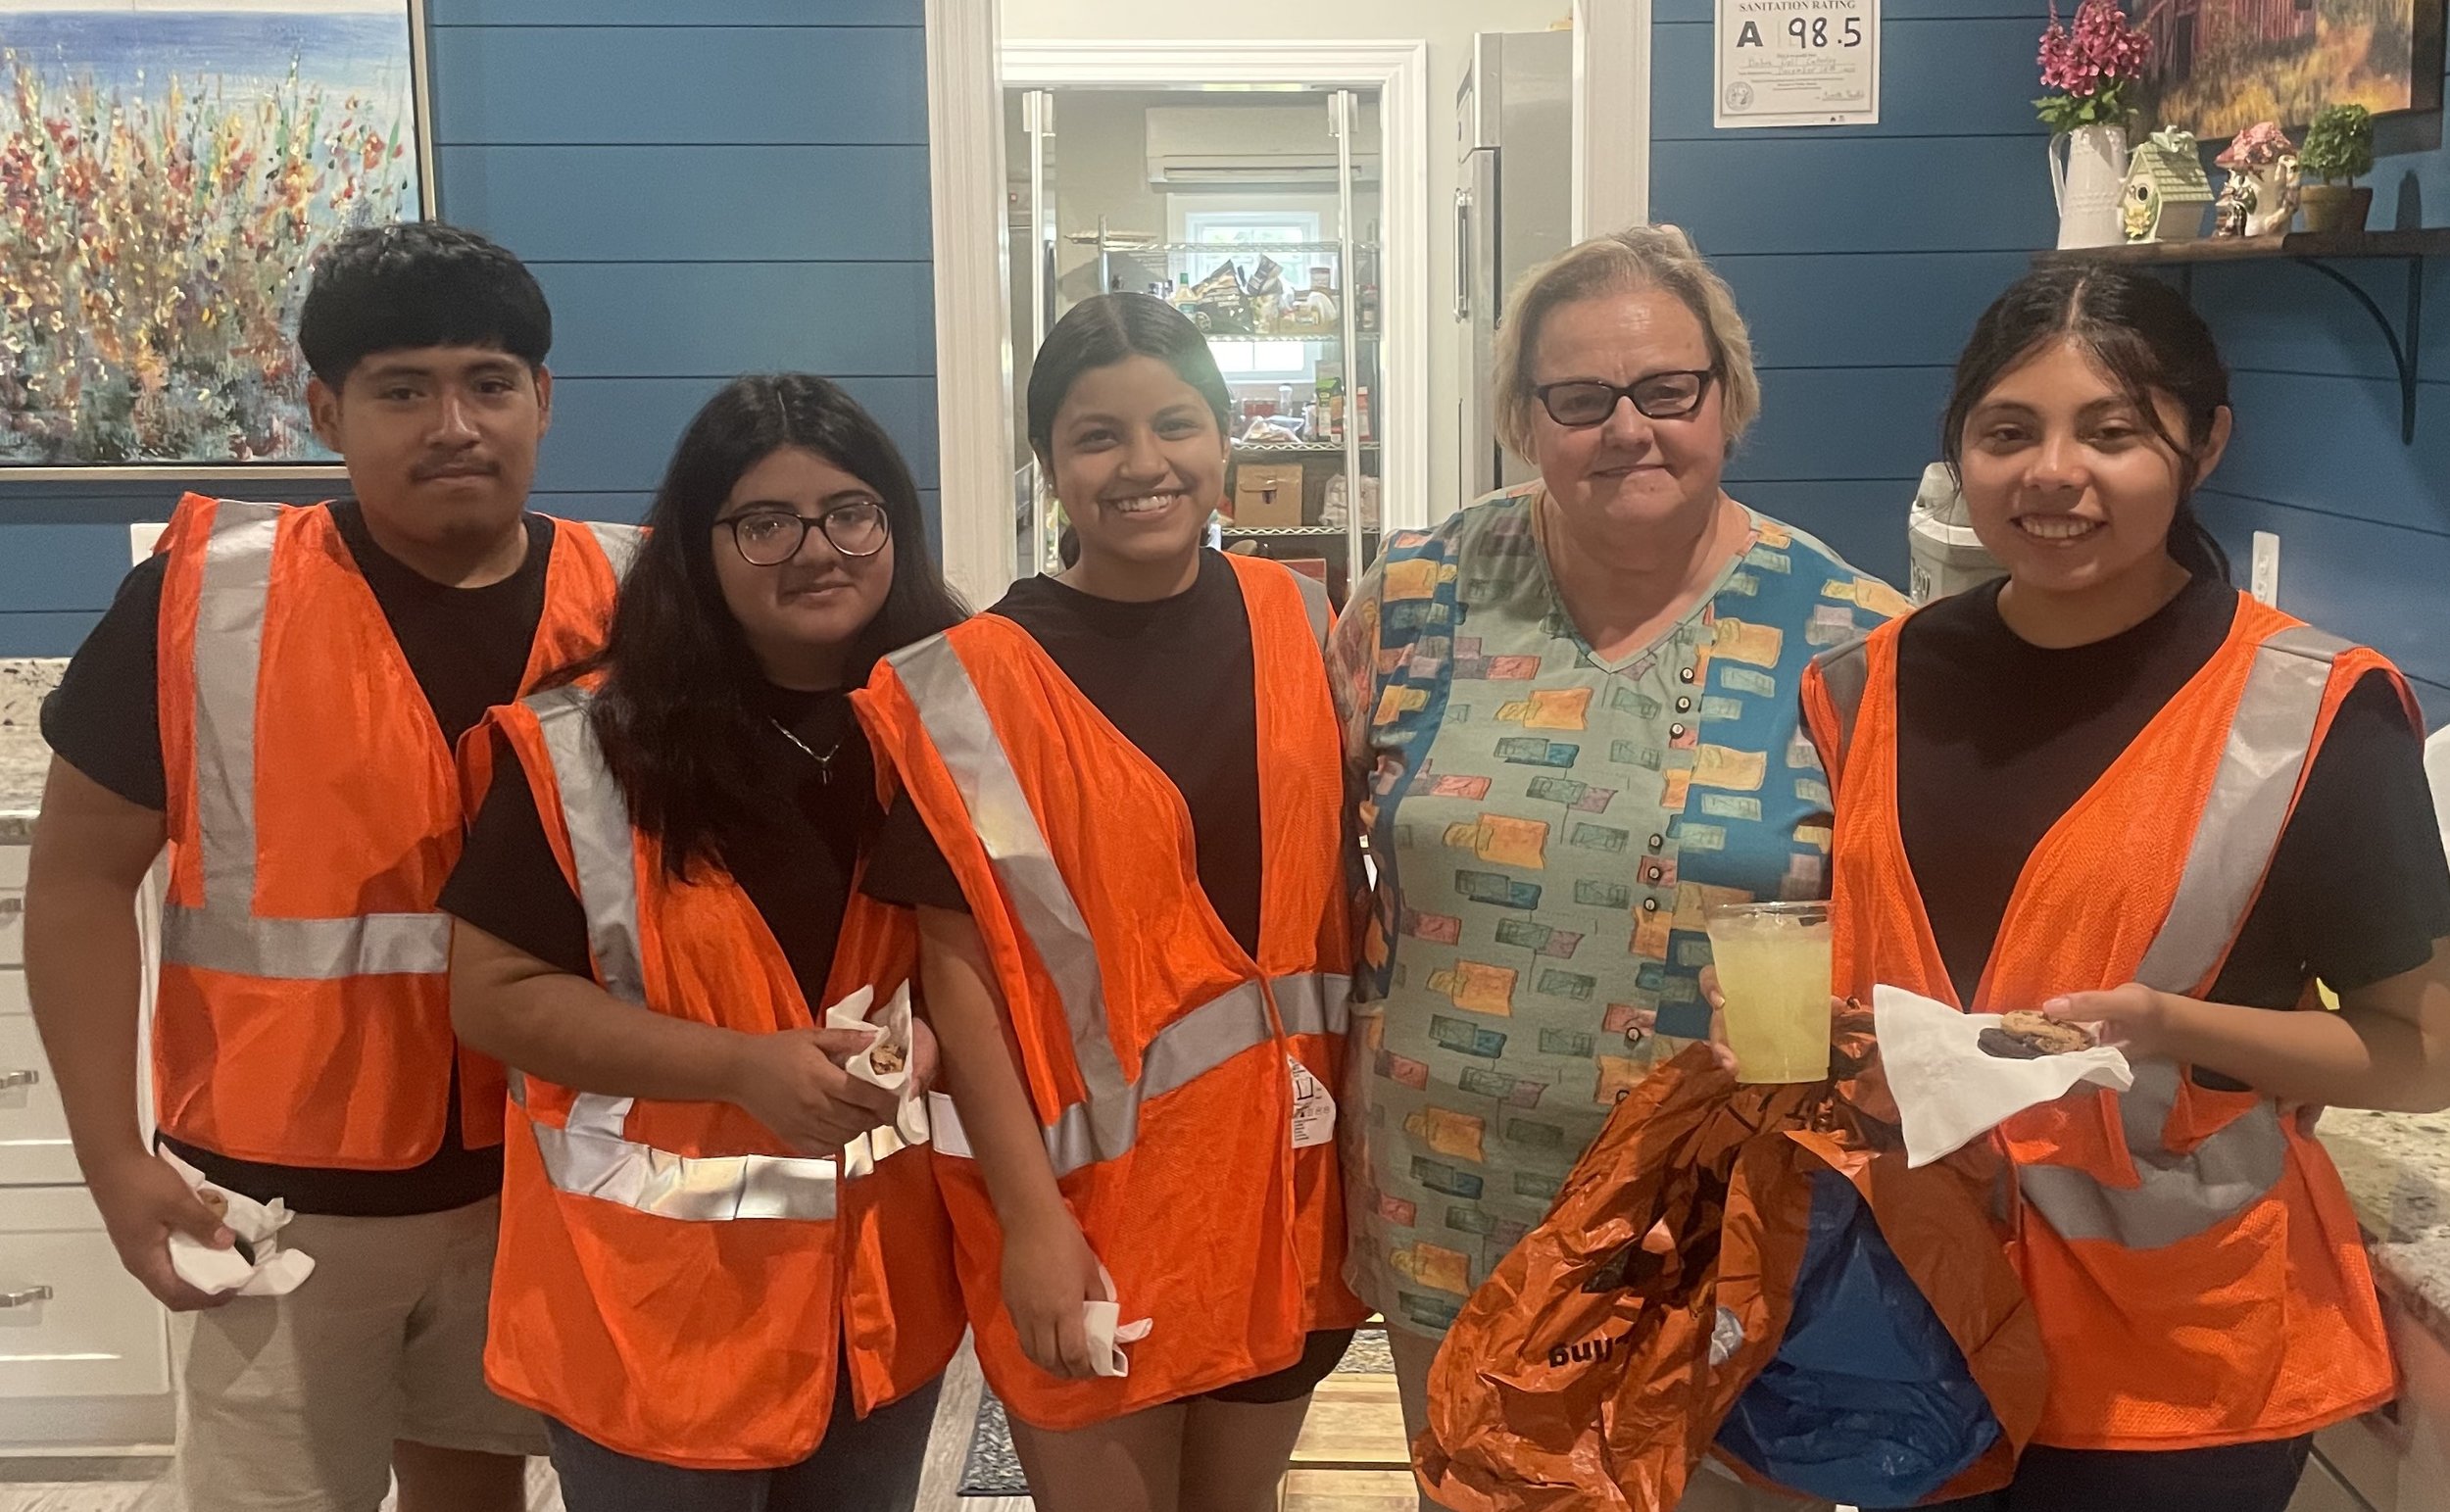  Debra Dail owner of Debra Dail Catering expressed her gratitude to GEC students before they began the Highway Cleanup on Middle School Road.&nbsp; Pictured are (left to&nbsp; right) Iver Reyes, DaMary Najera, Julianna Acevedo, Mrs. Dail and Jeidy Ta